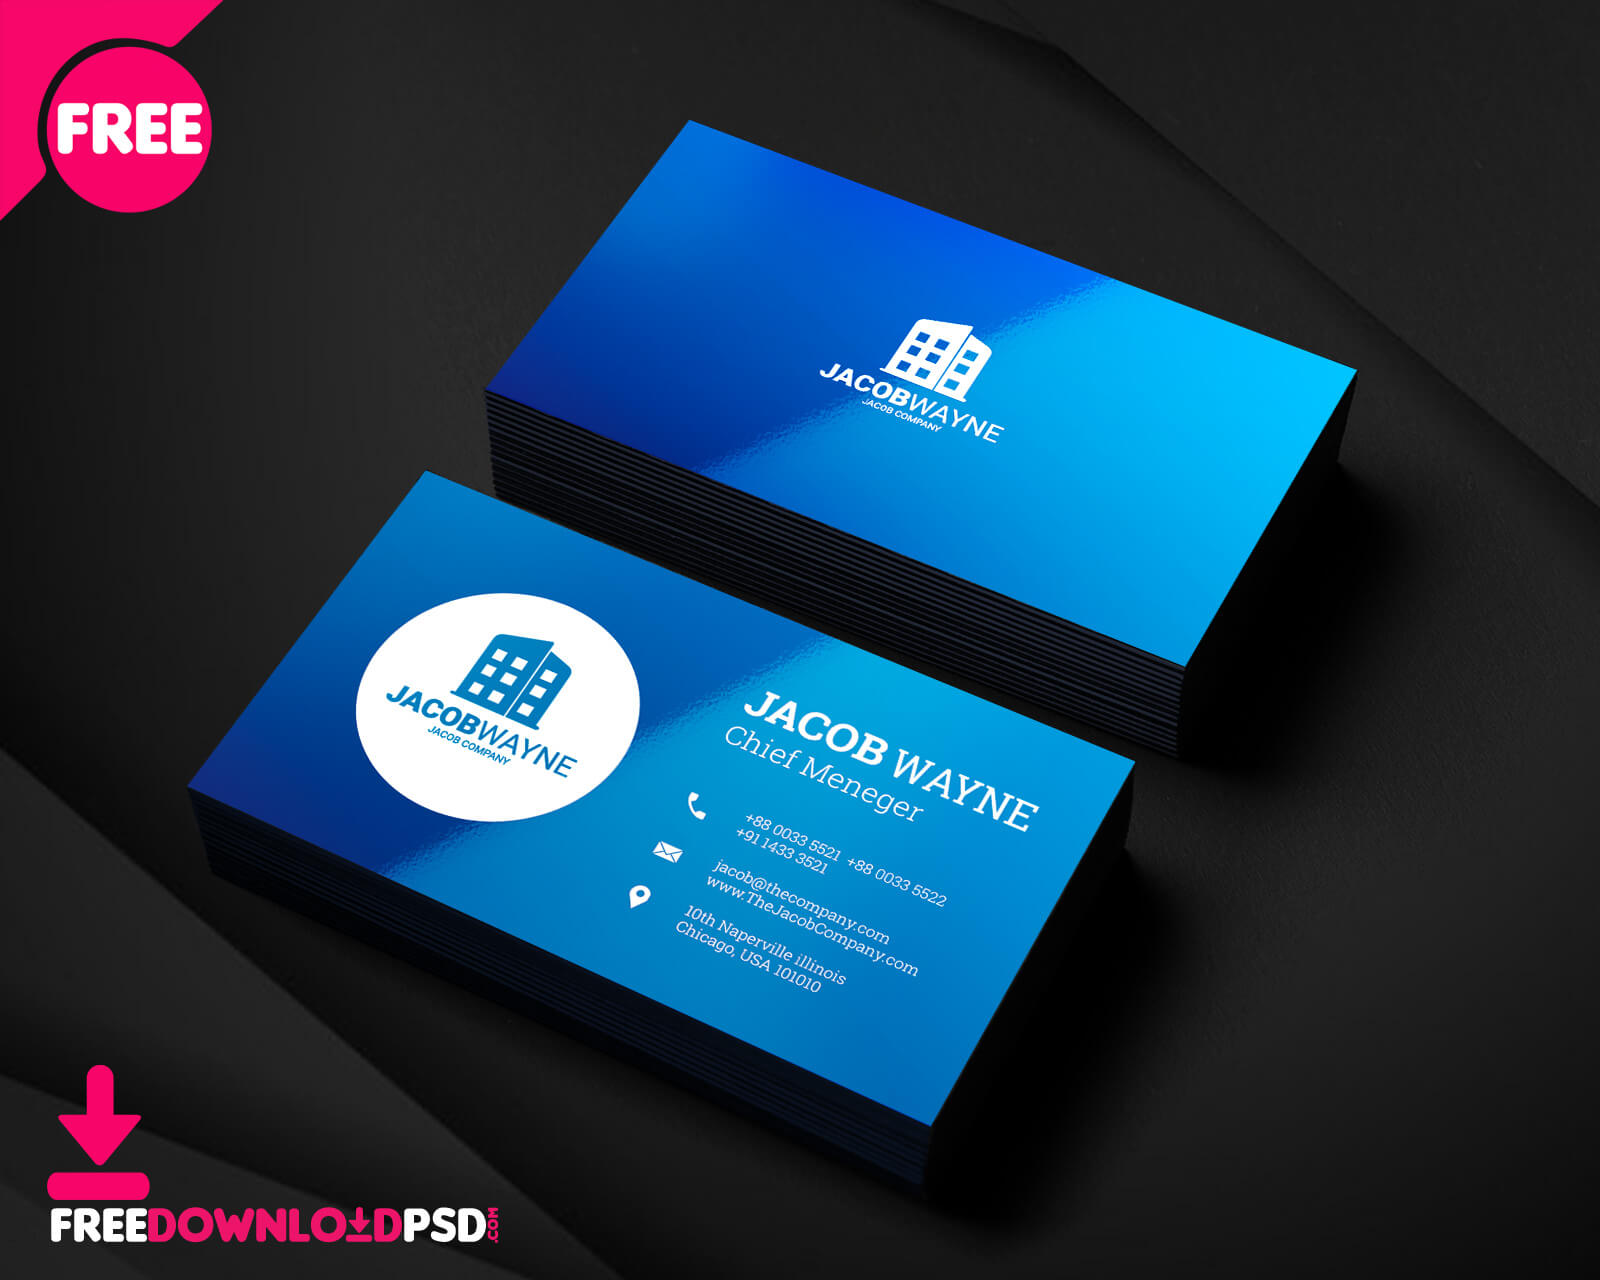 012 Photoshop Business Card Template Ideas Free Real Estate Intended For Photoshop Business Card Template With Bleed